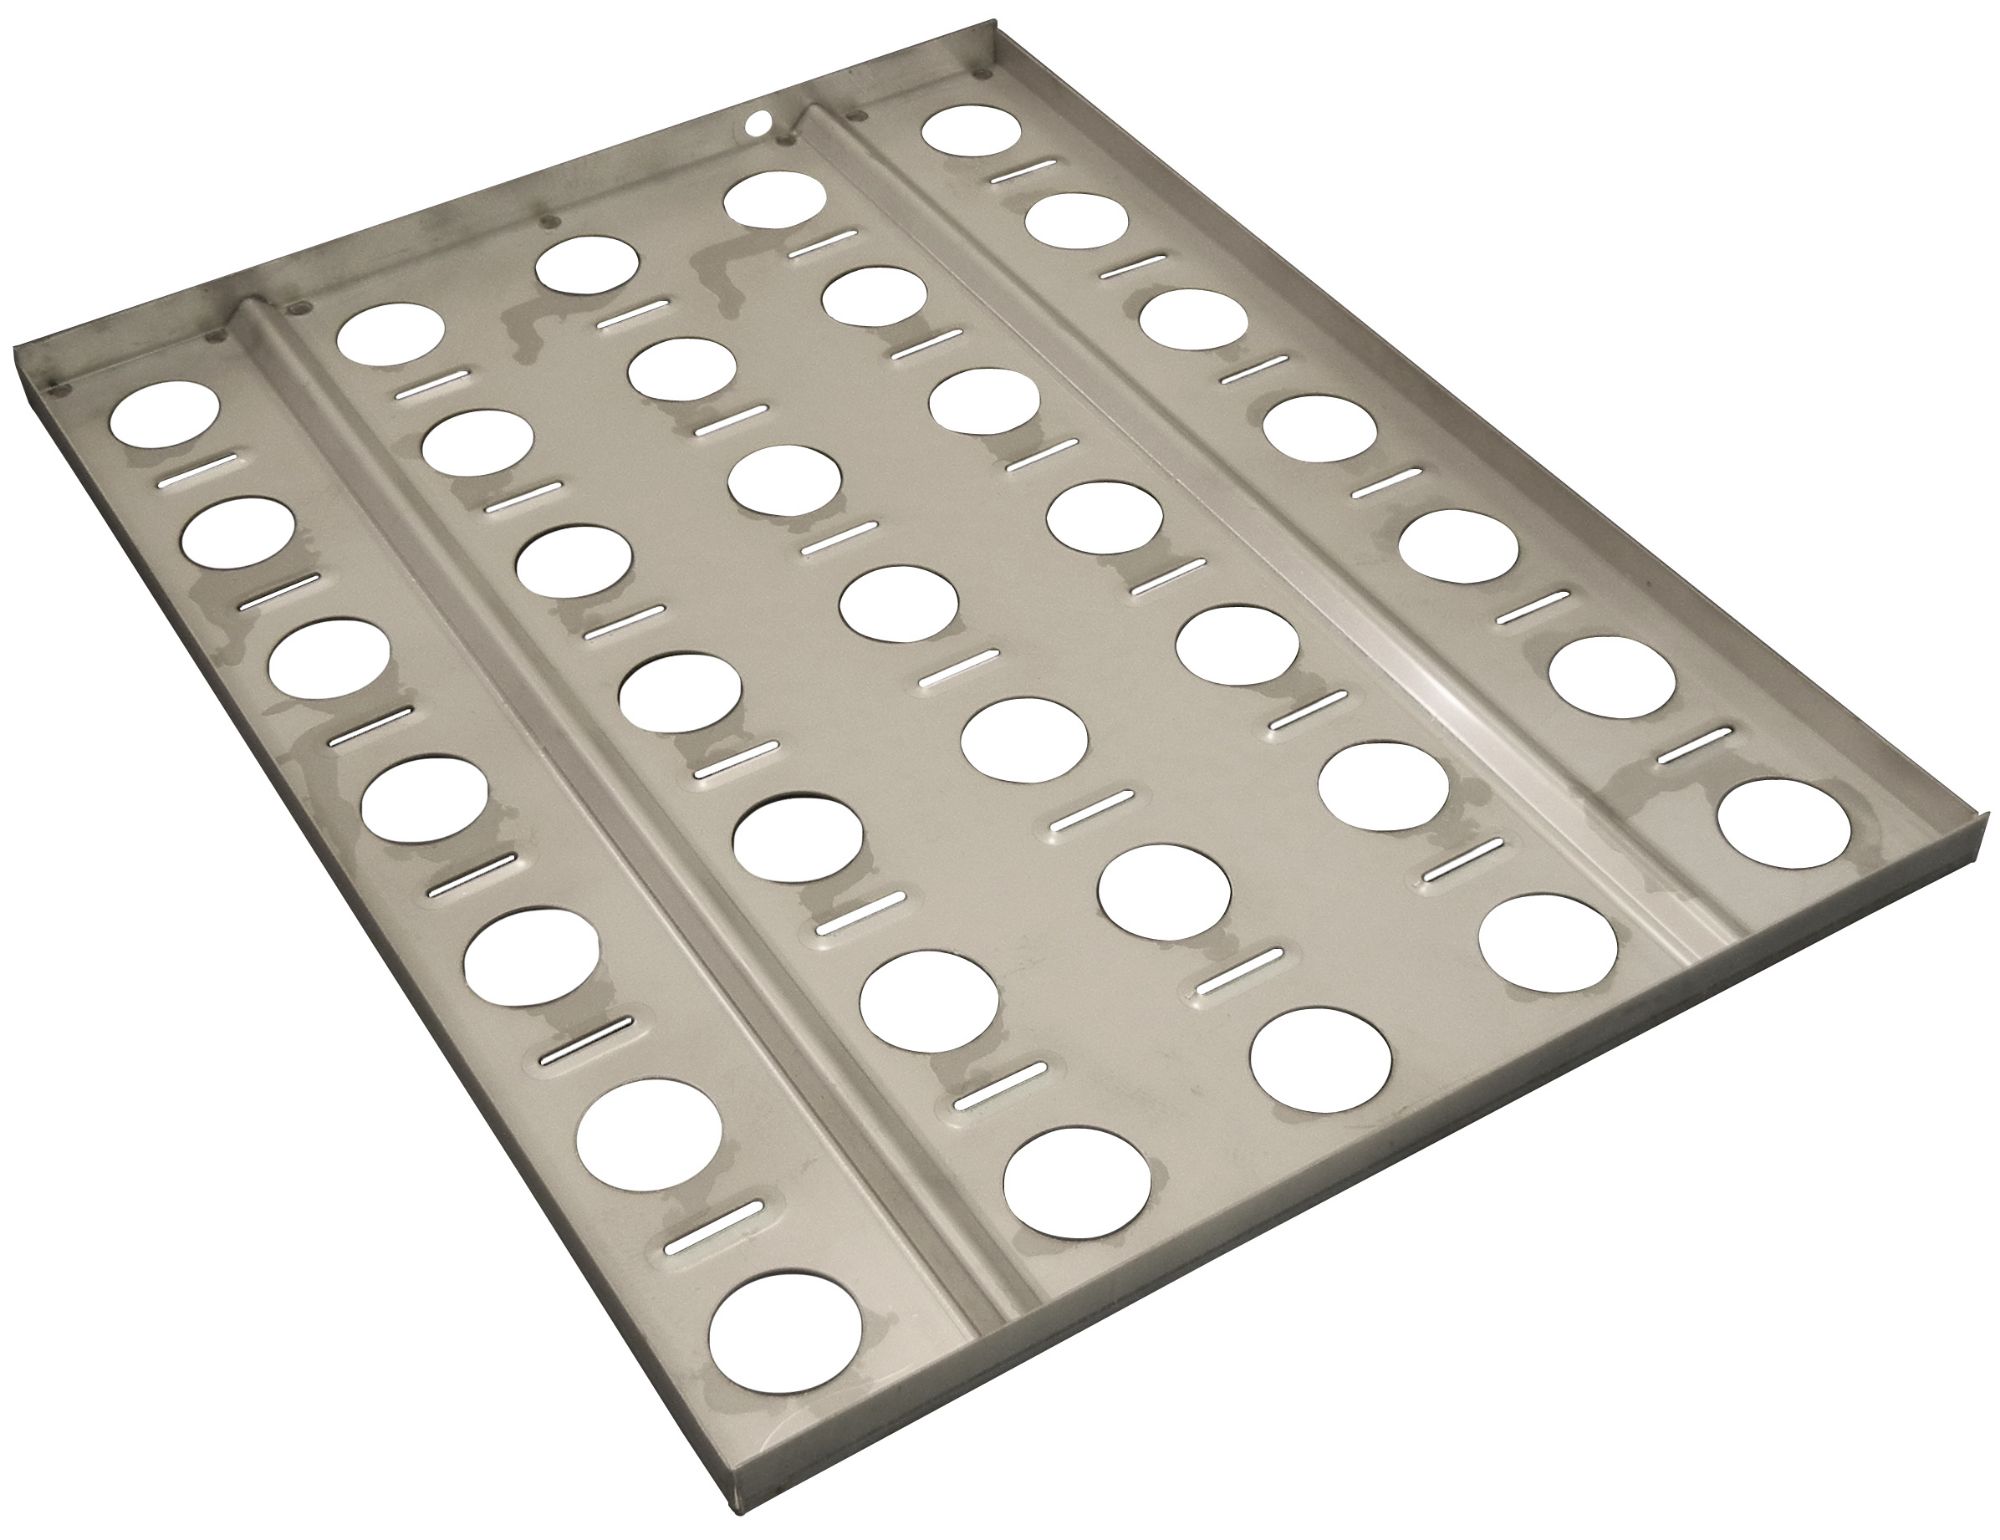 Stainless steel heat plate for Alfresco brand gas grills